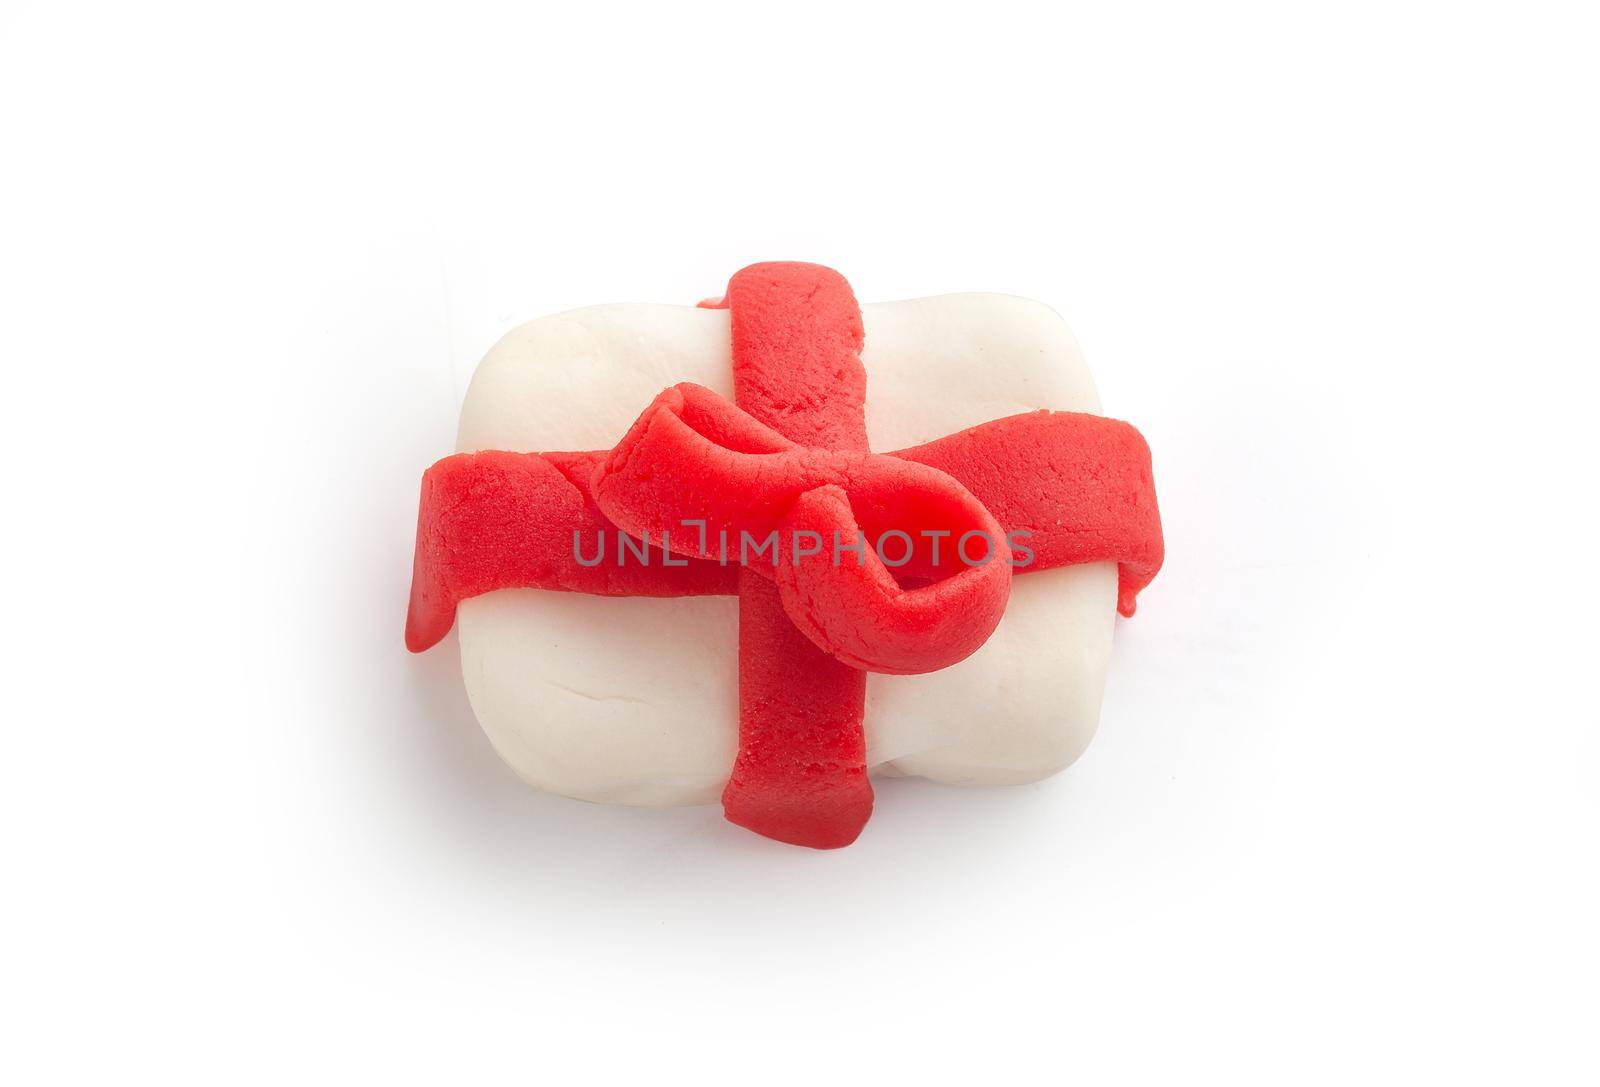 Plasticine gift with red ribbon by Angorius